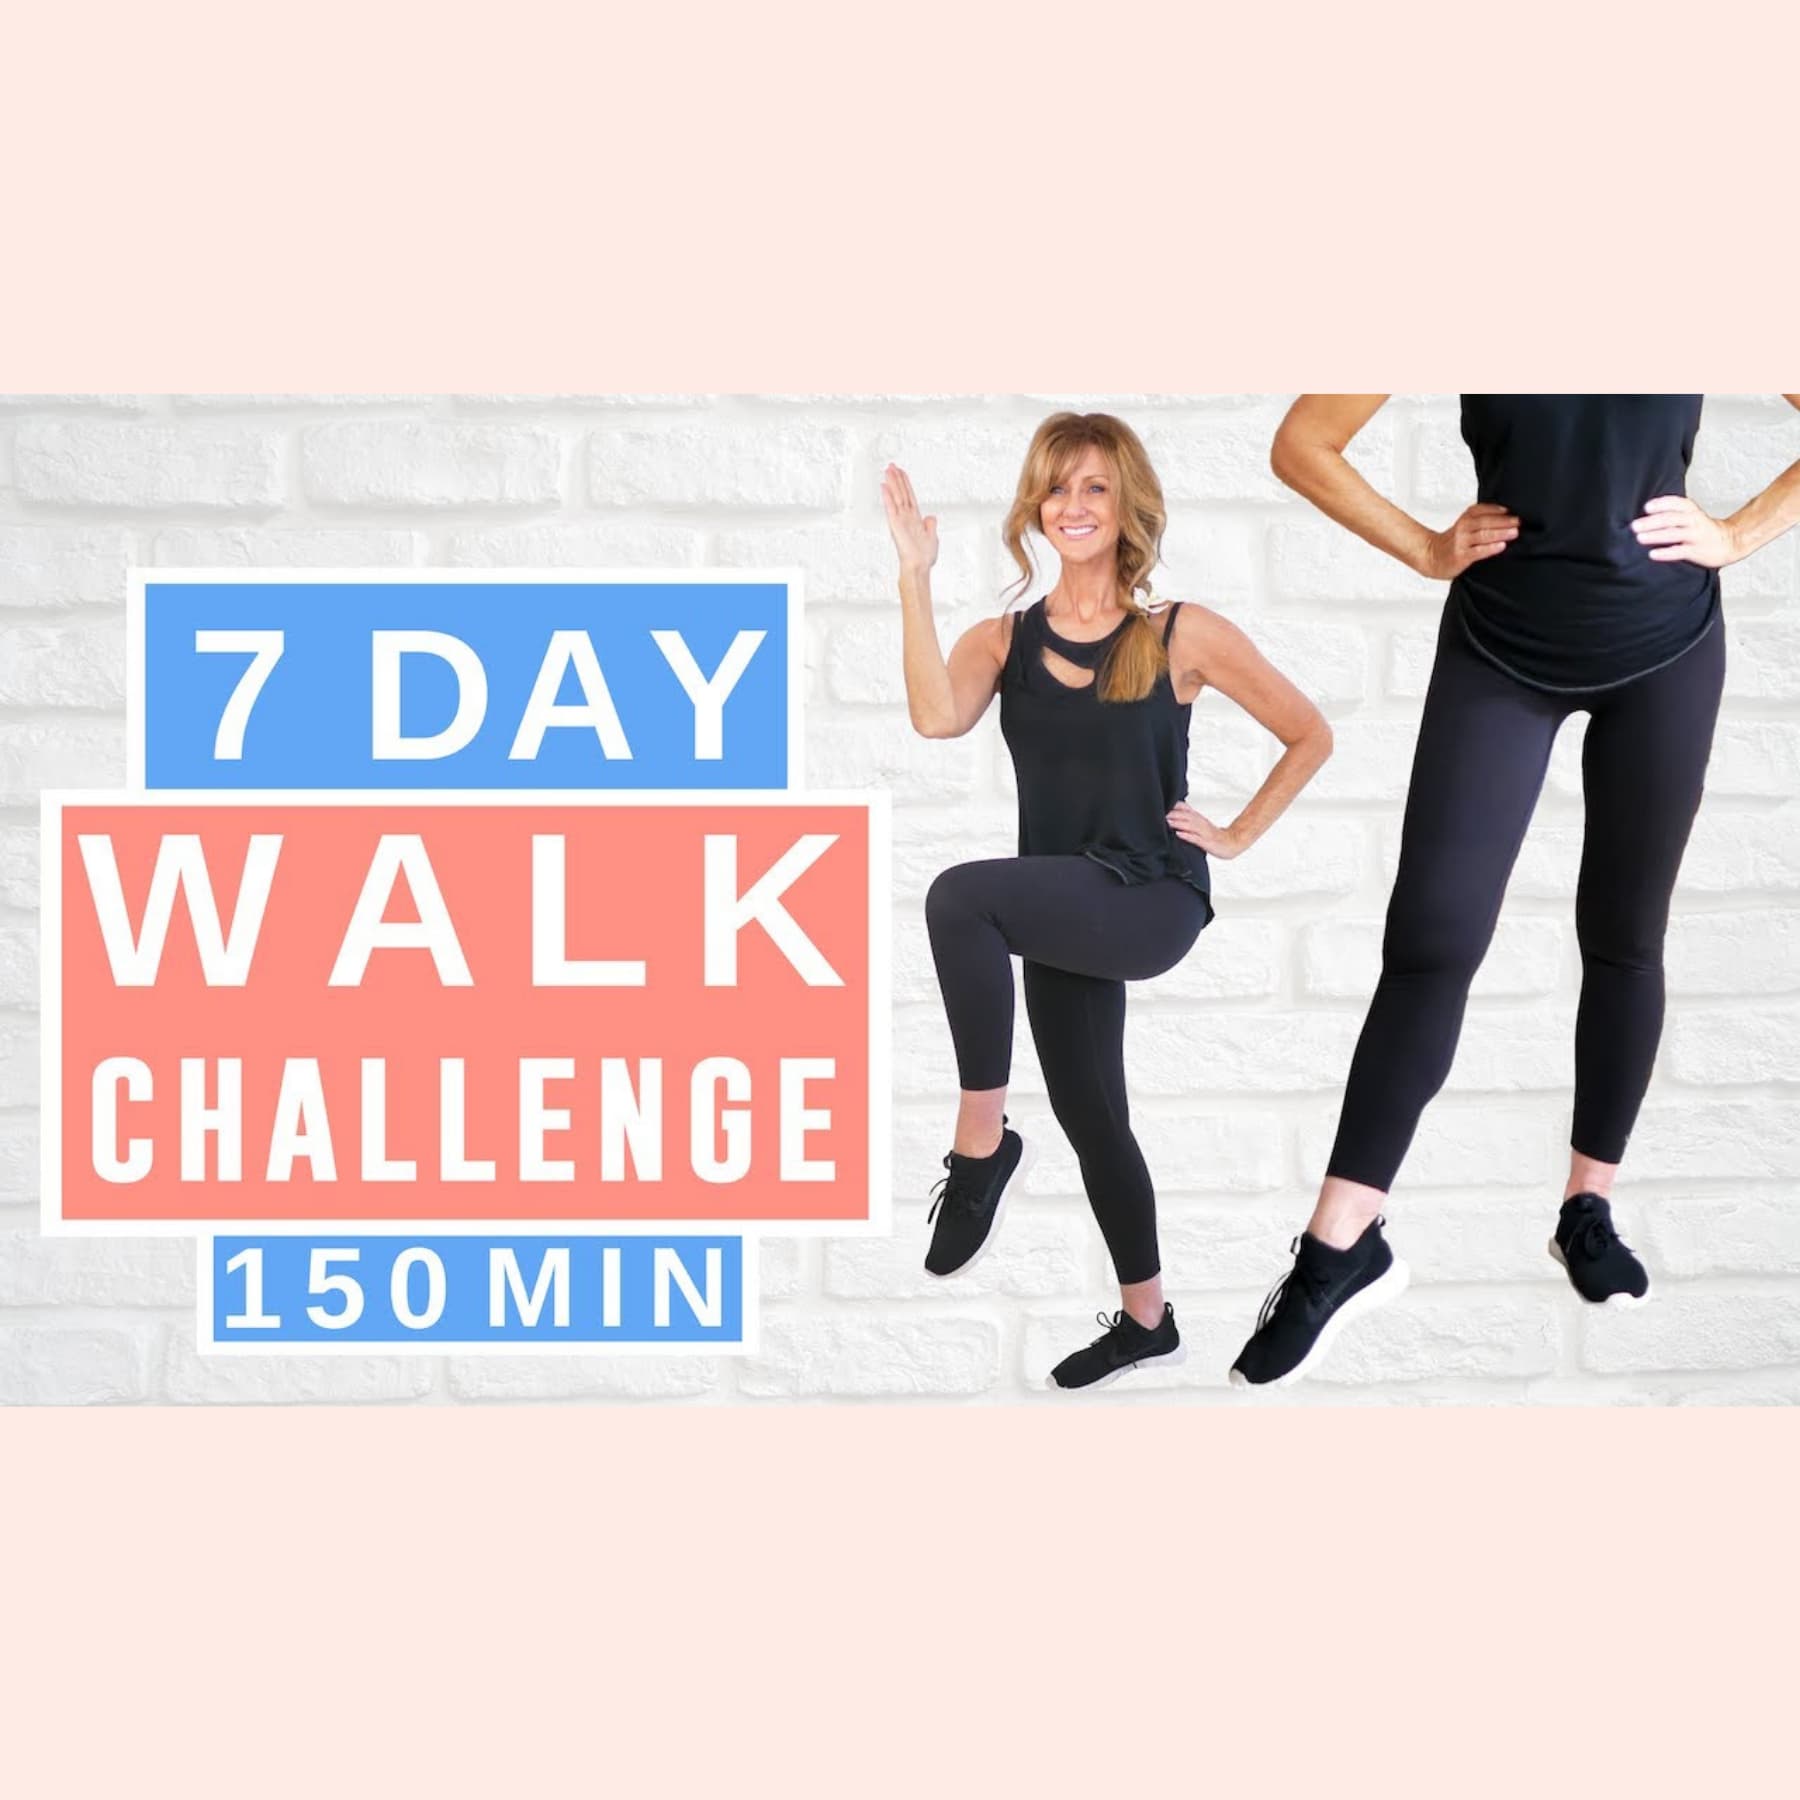 The Best Walking Workout for People Over 50 - Parade